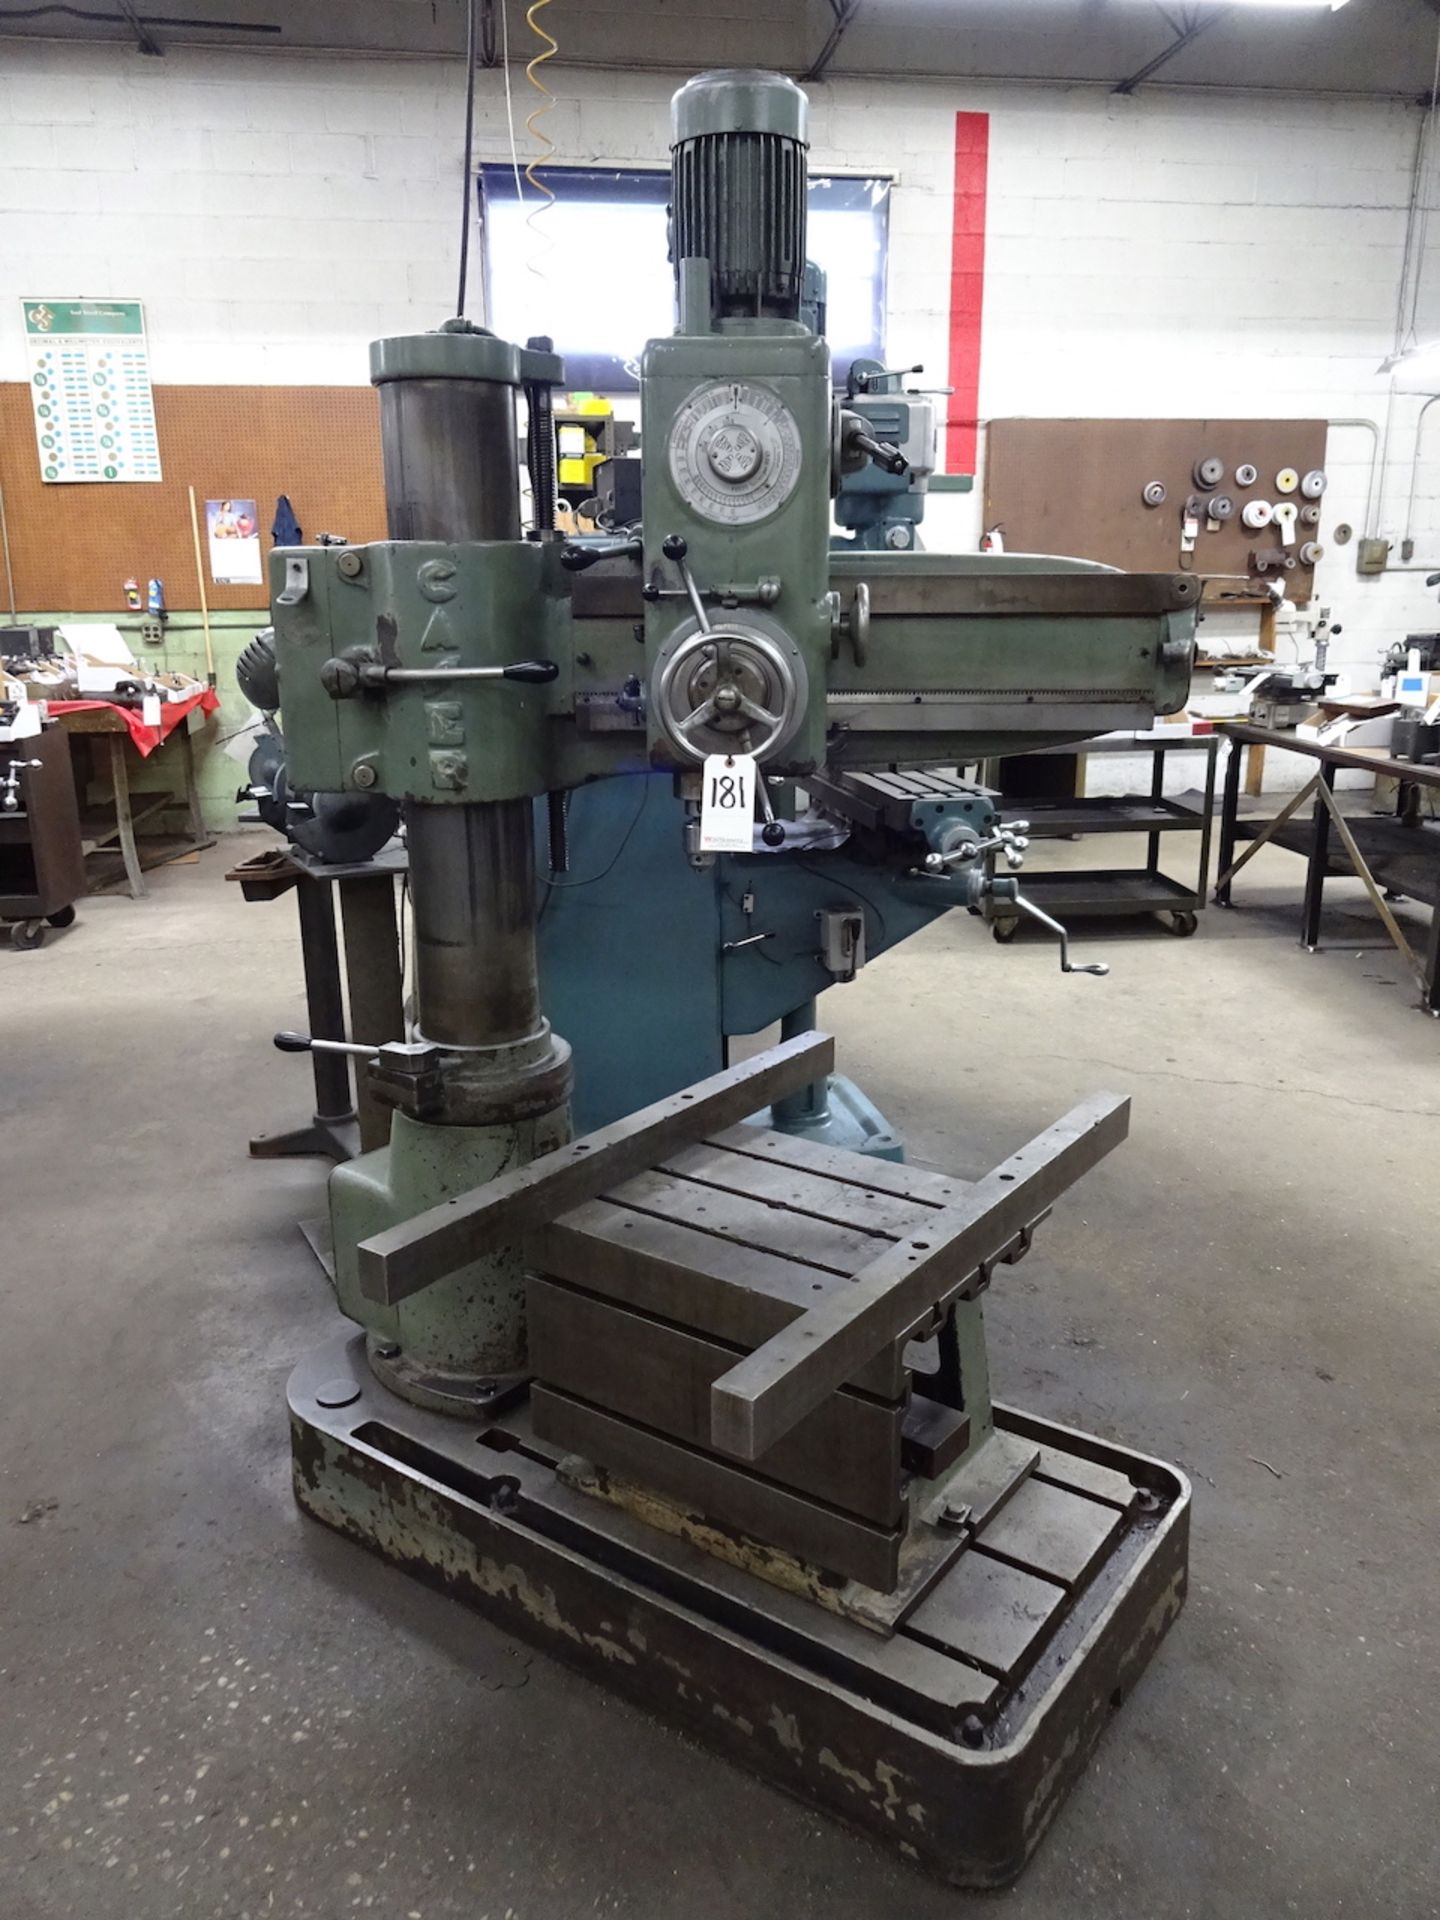 Caser 7-1/2 in. Column x 3 ft. (approx.) Radial Arm Drill, S/N N/A, 24 in. x 18 in x 14 in. T-Slot